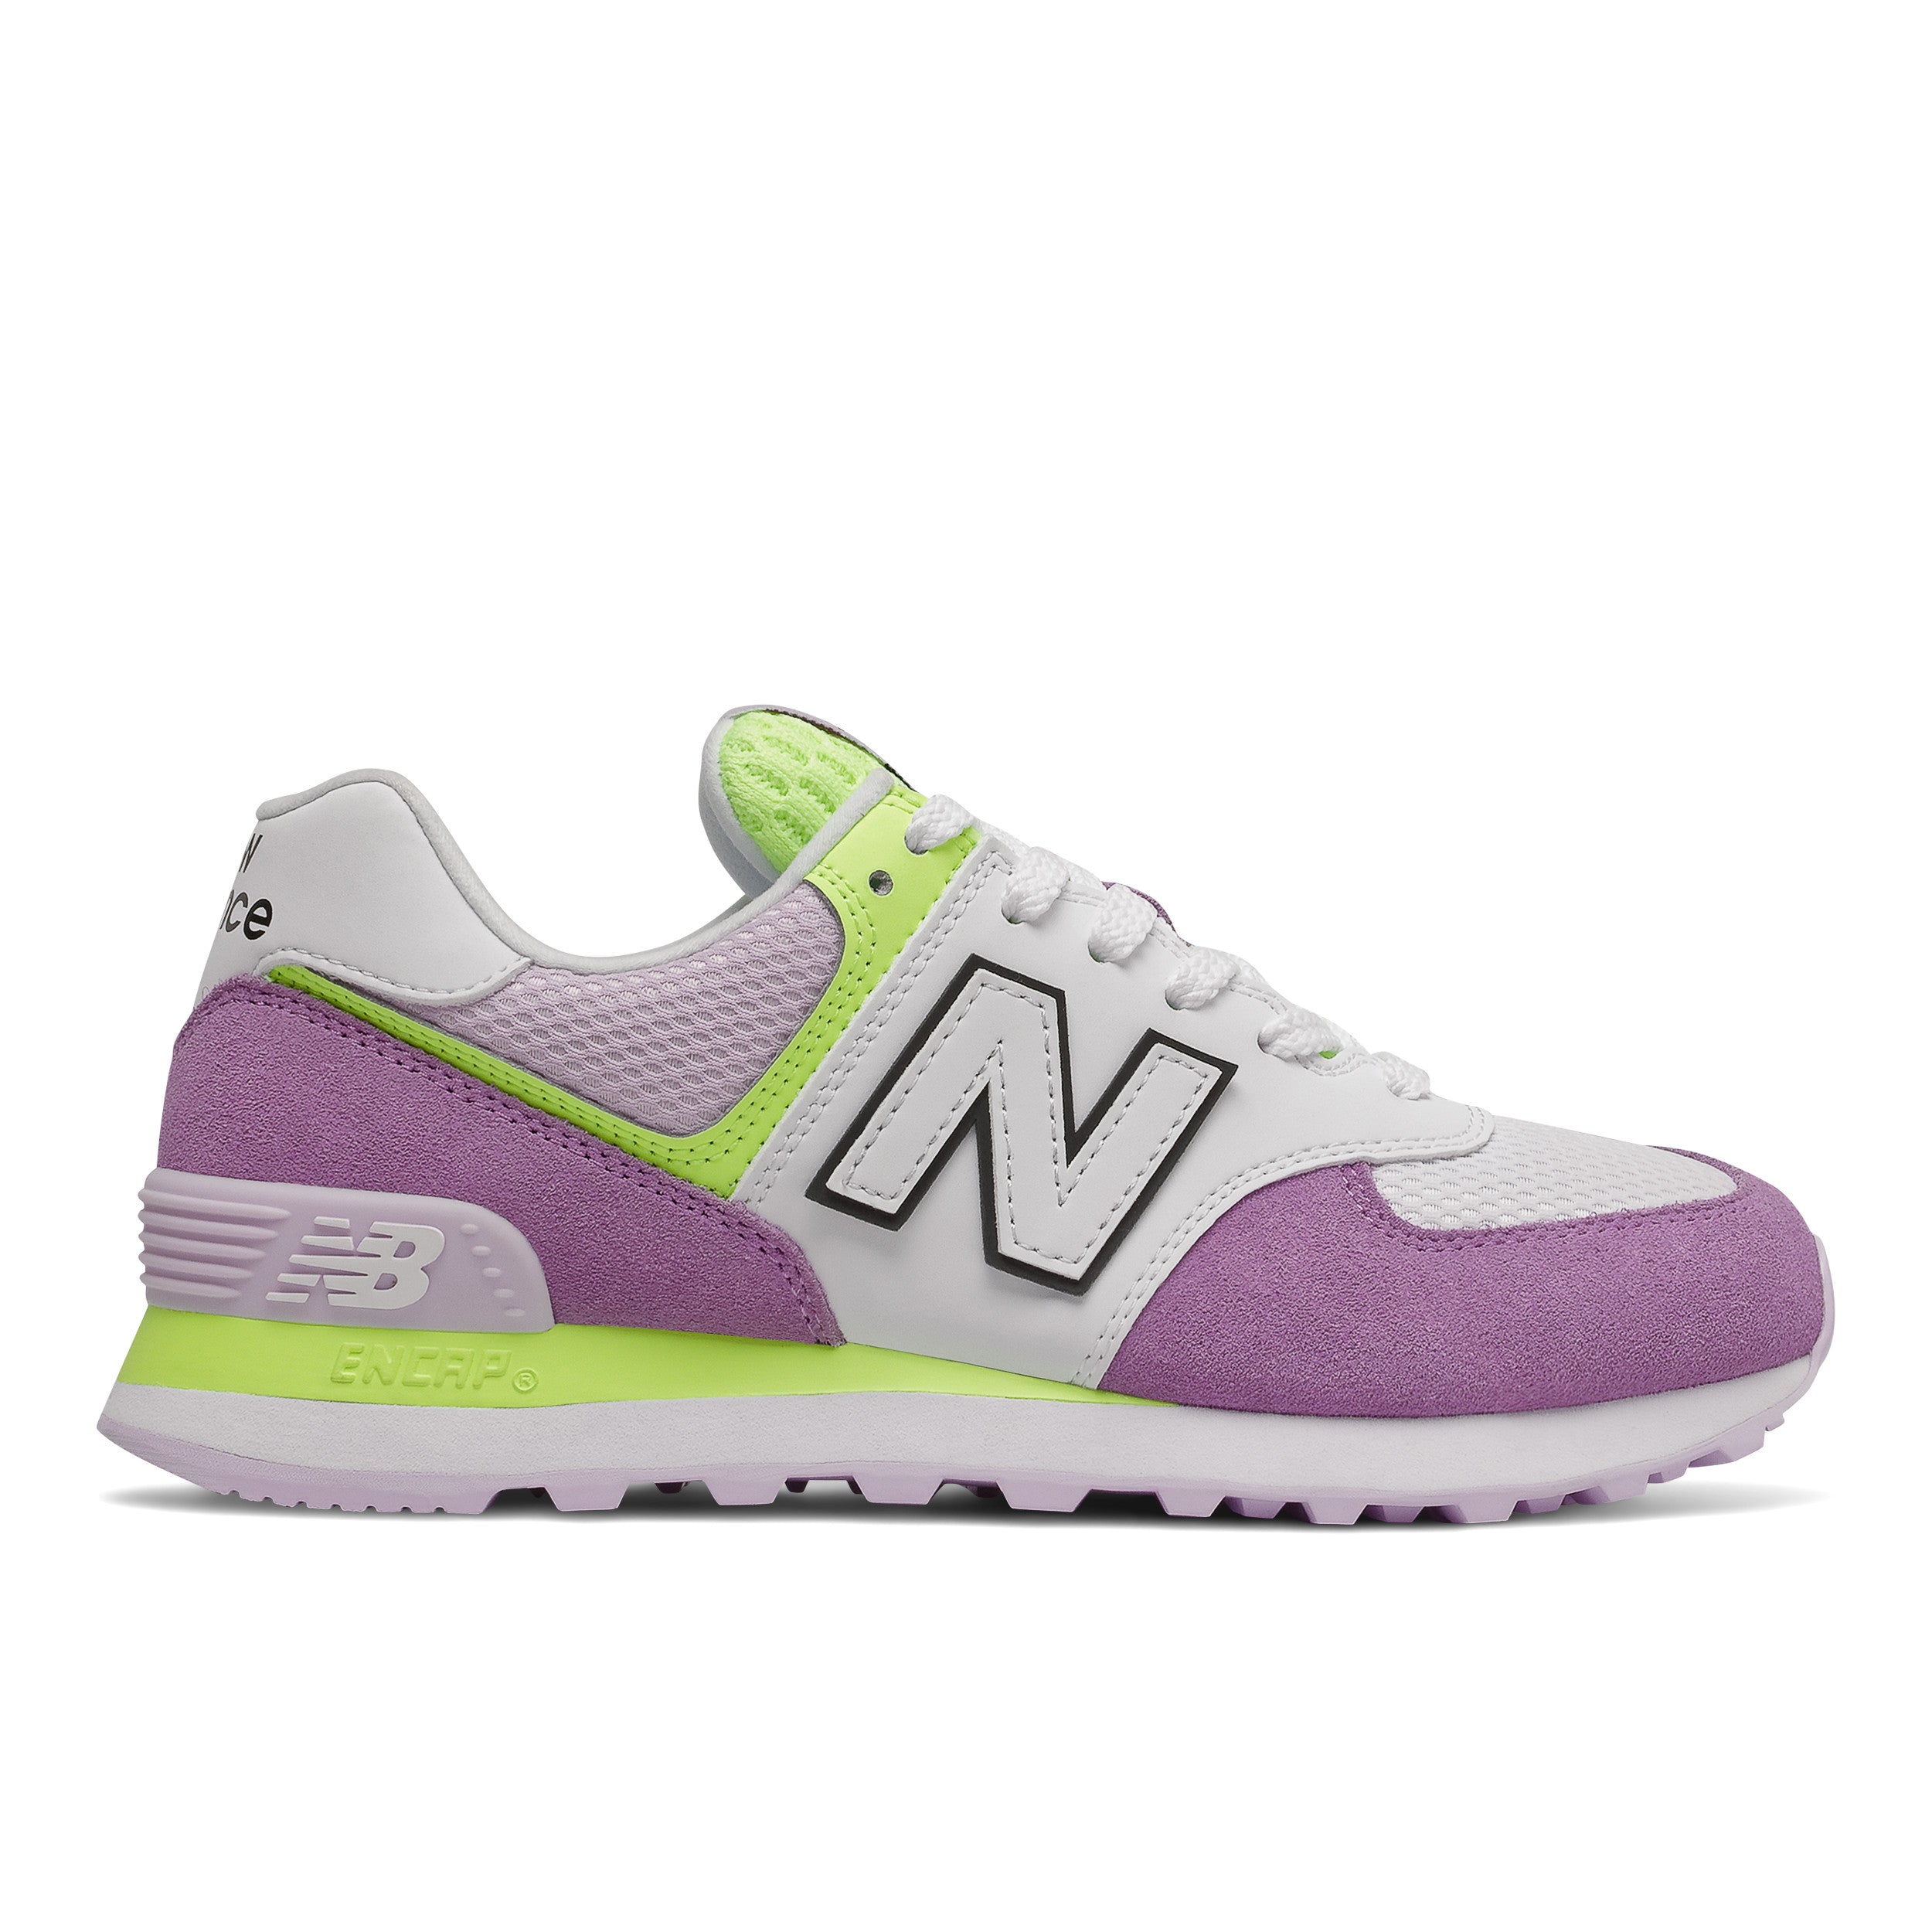 Buy Women's New Balance Purple & Bleached Lime Tennis Shoe at Style InStyle-Tuscaloosa